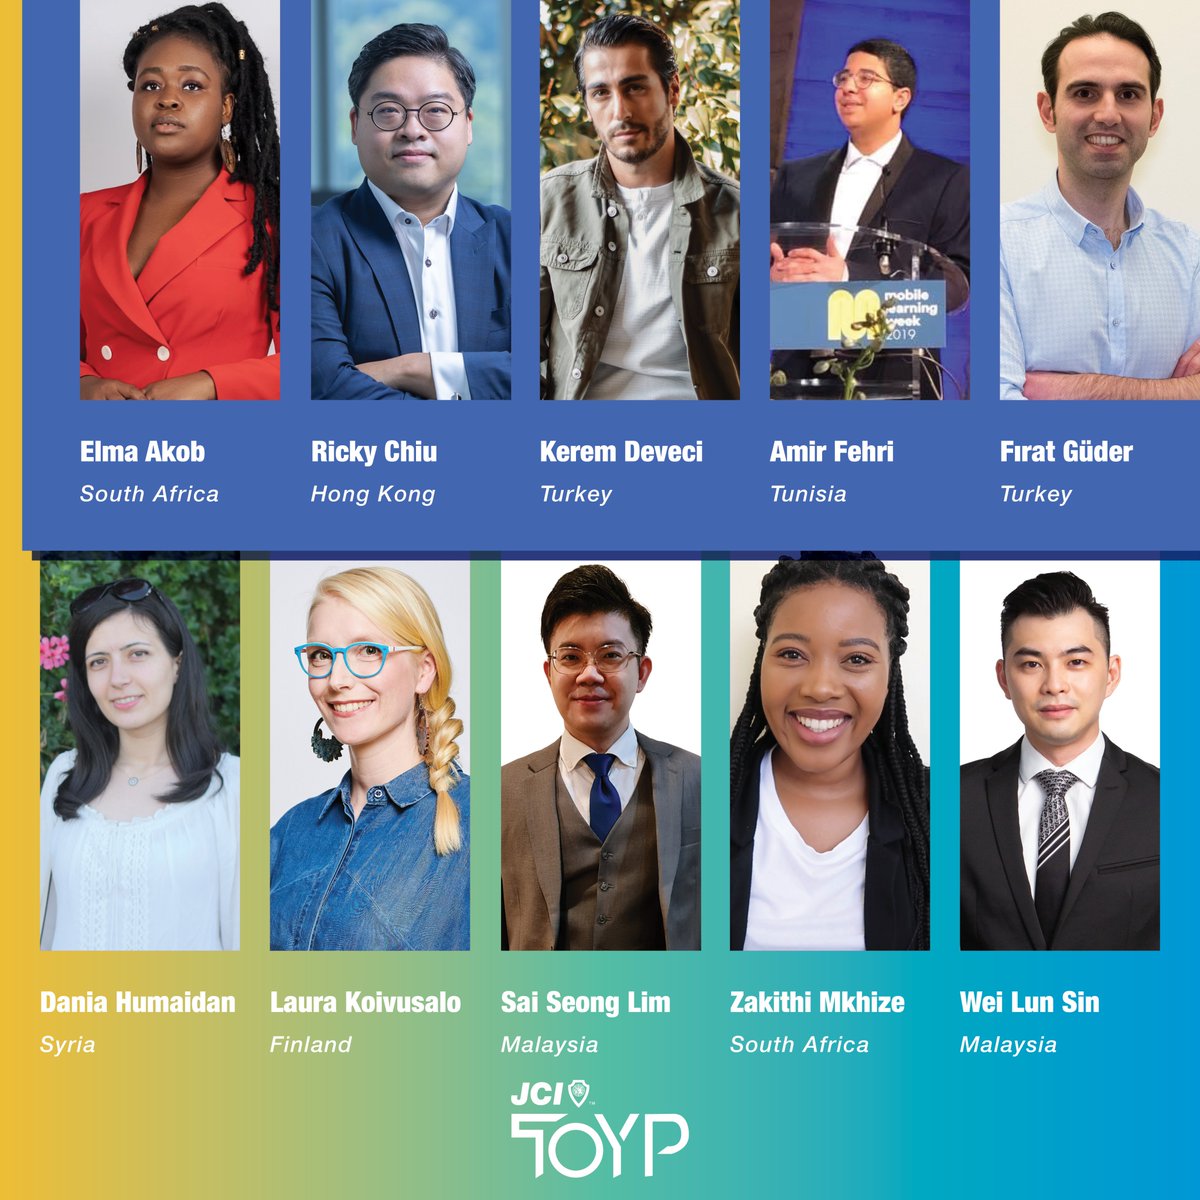 The results are in — congratulations to the 2022 JCI Ten Outstanding Young Persons of the World! Read more about their amazing stories here: toyp.jci.cc